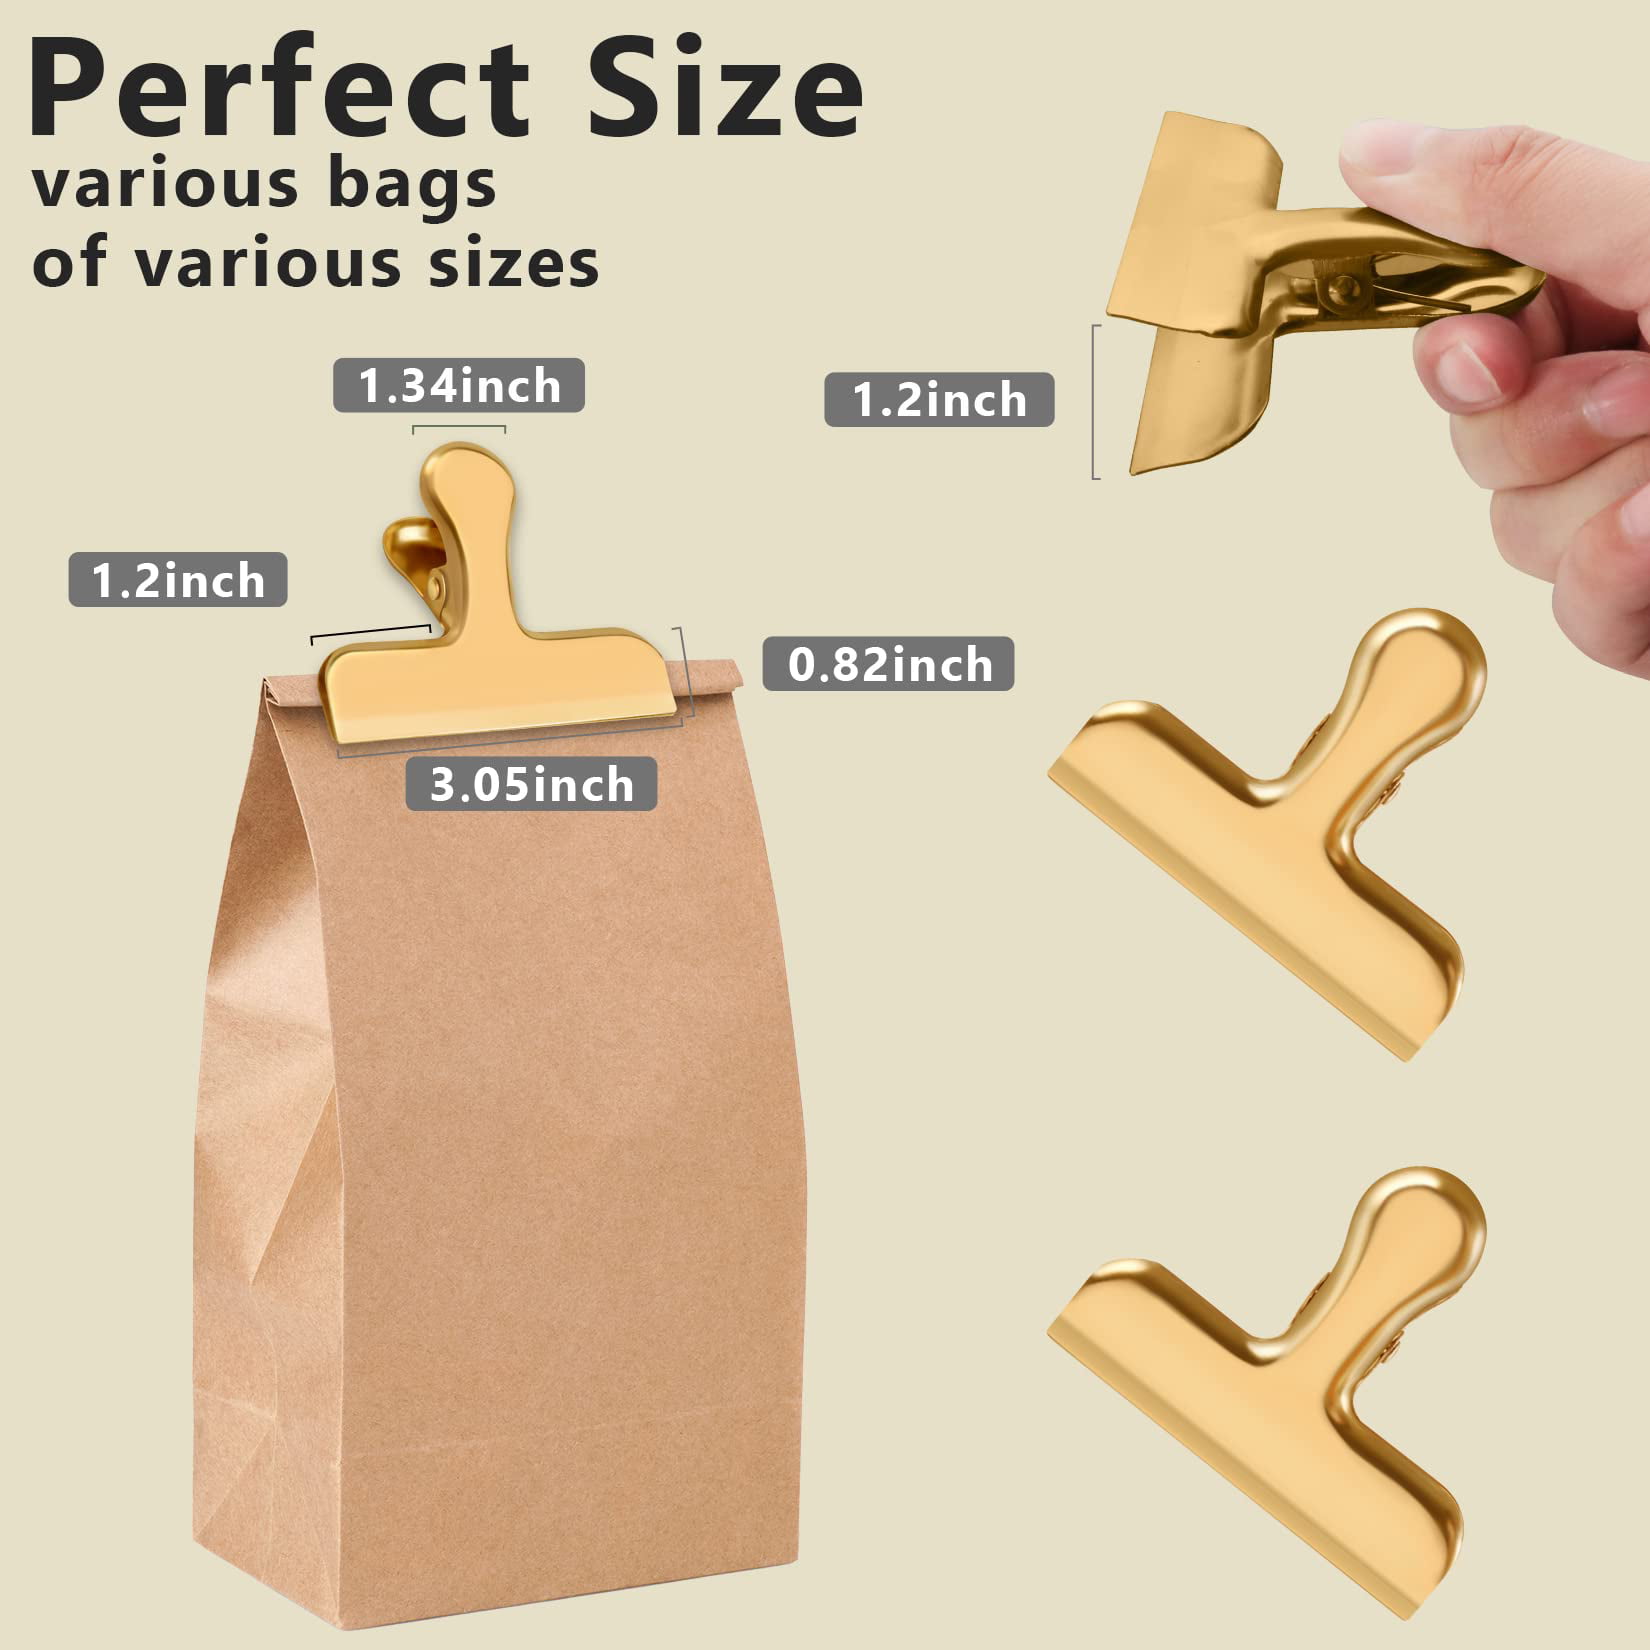 FINDMAG Chip Clips Heavy Duty Stainless Steel Chip Bag Clips, Food Bags  Clamp Great for Kitchen Office to Seal Coffee Bags, Chip Bags, Paper Sheets  